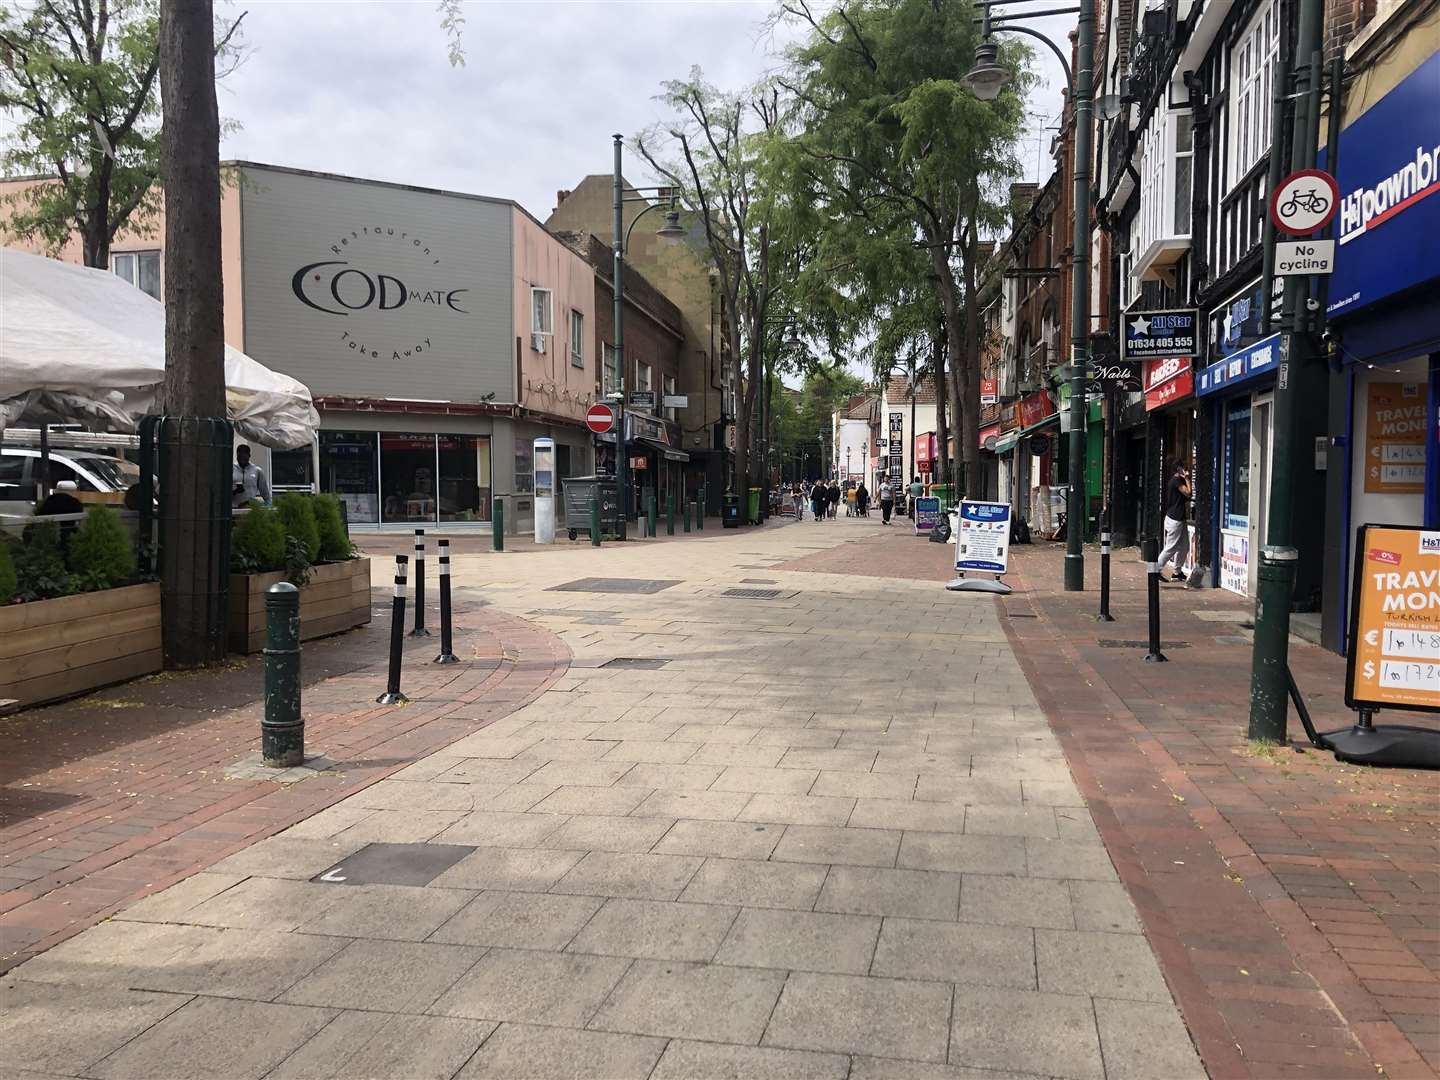 Two people were injured after a 'fall from height' in the town centre